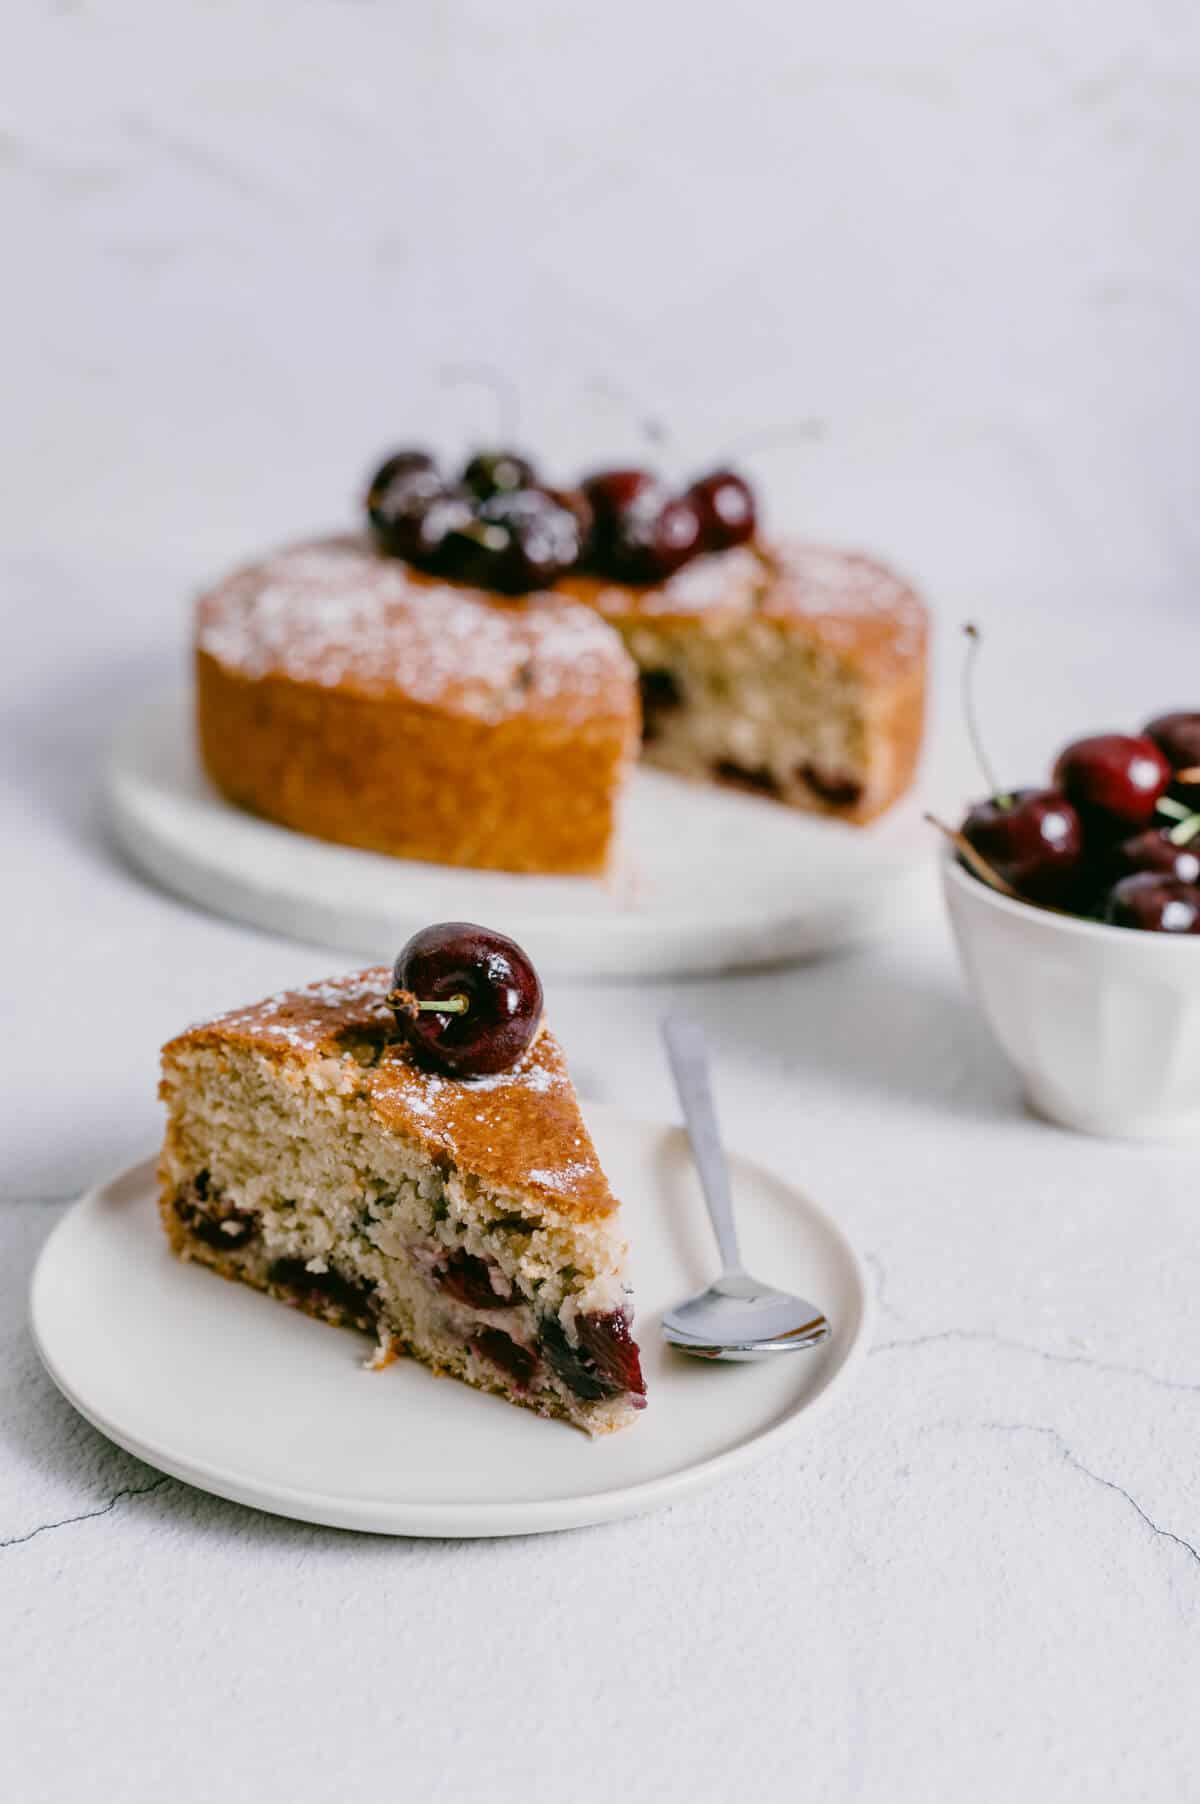 a slice of cherry and coconut cake on a white plate.